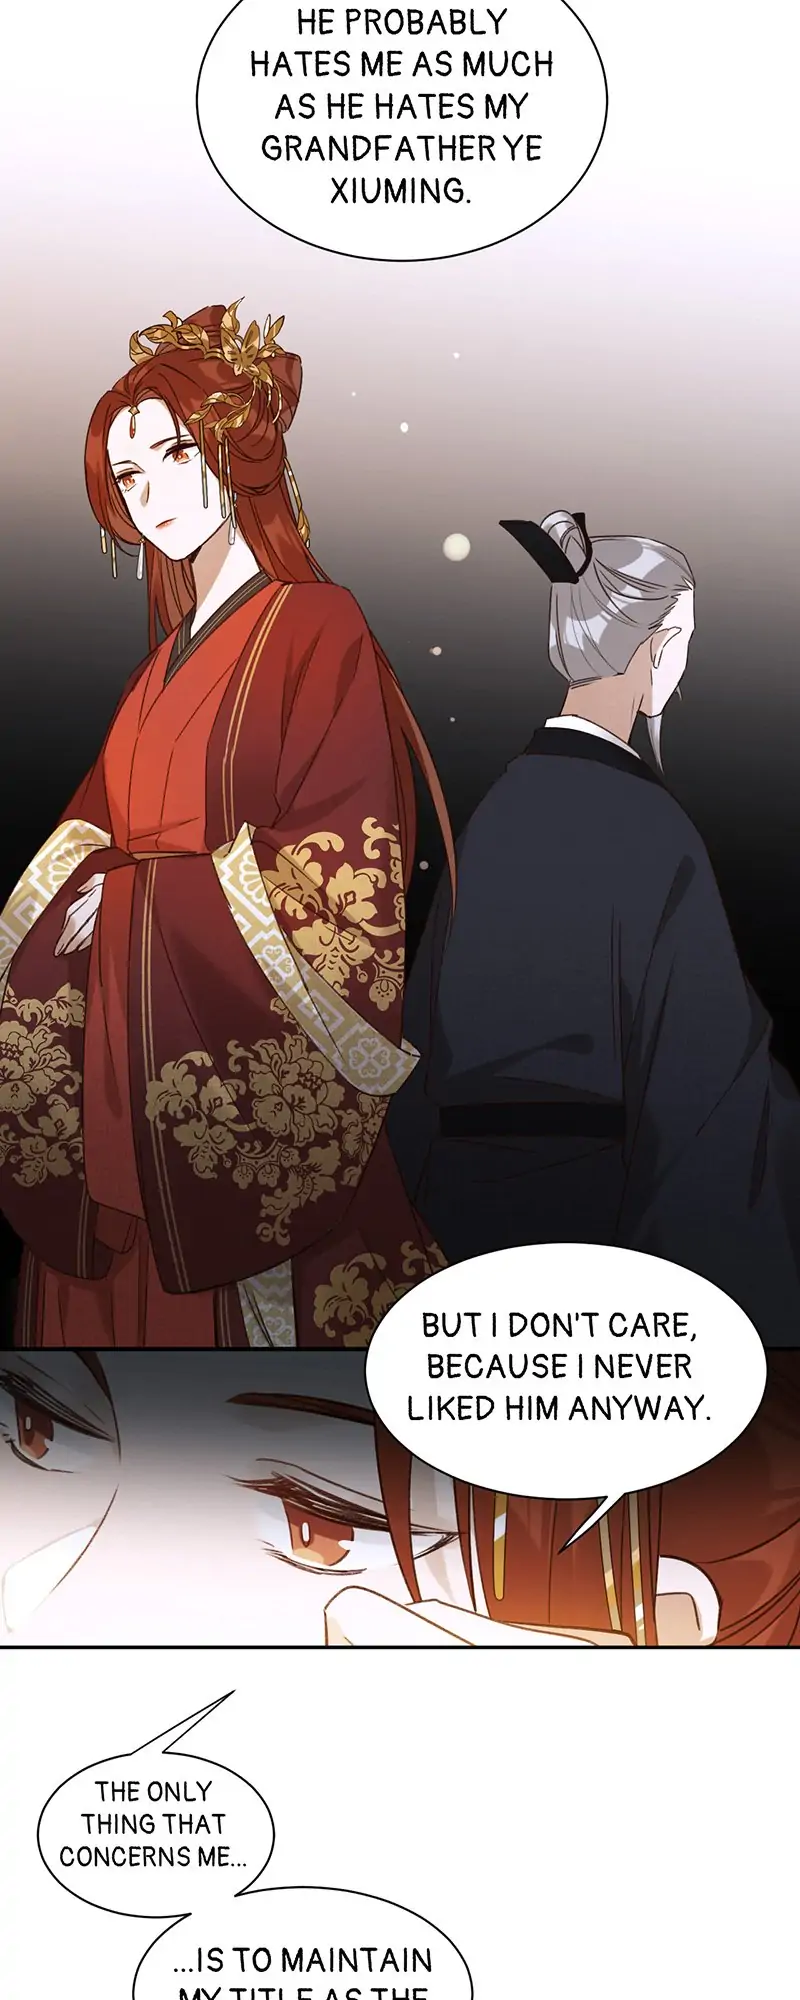 The Empress with No Virtue chapter 5